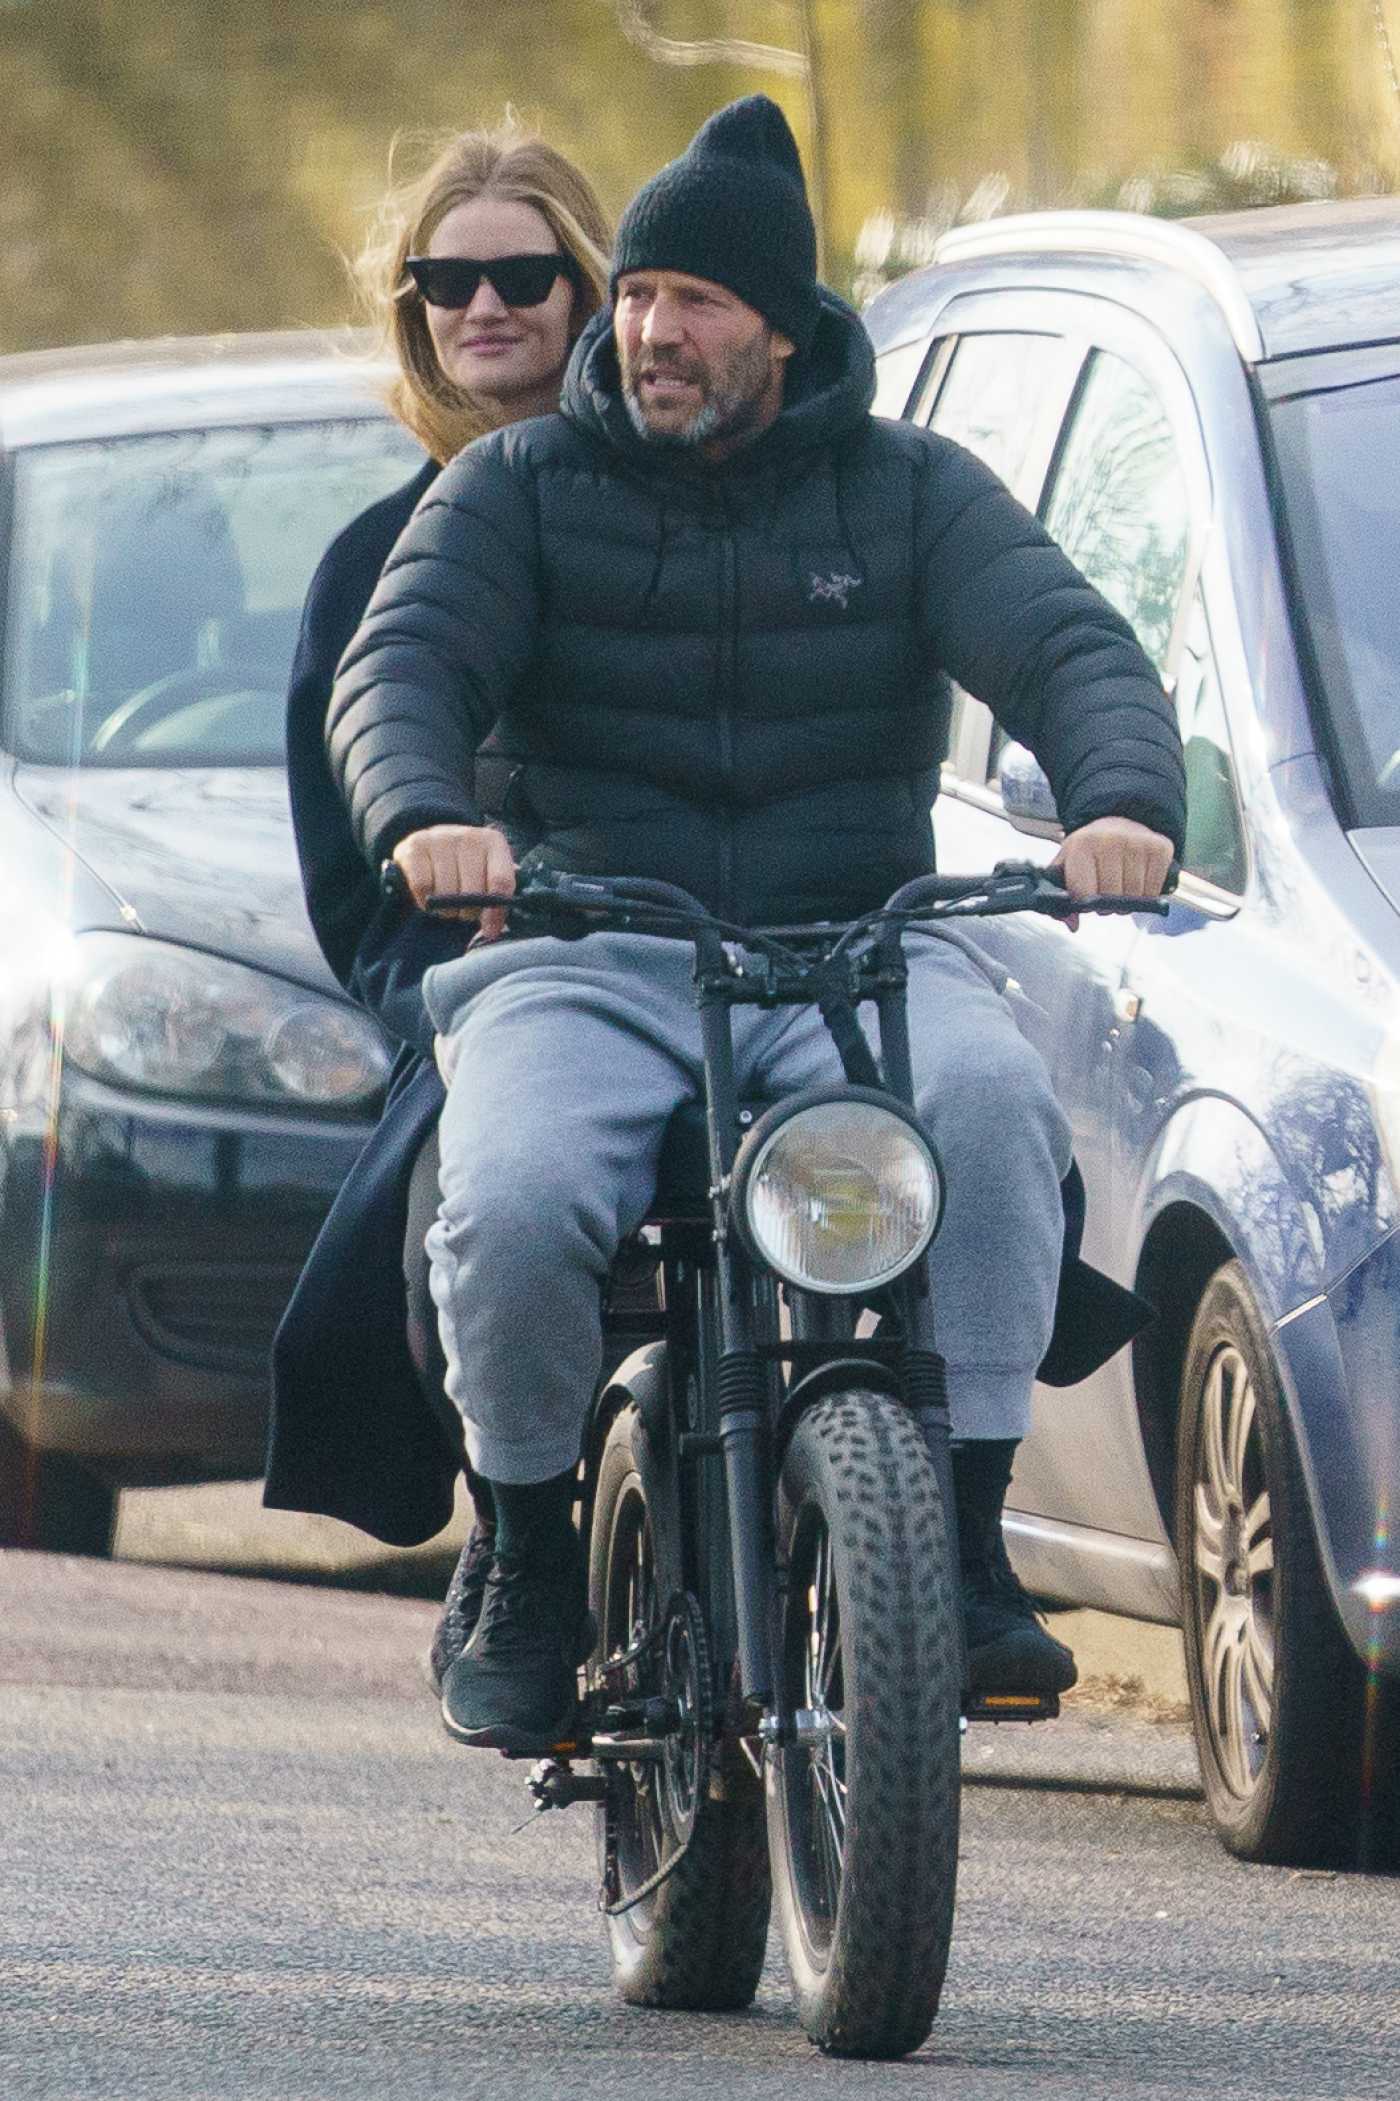 Rosie Huntington-Whiteley in a Black Coat Does a Bike Ride with Jason Statham in London 03/24/2021